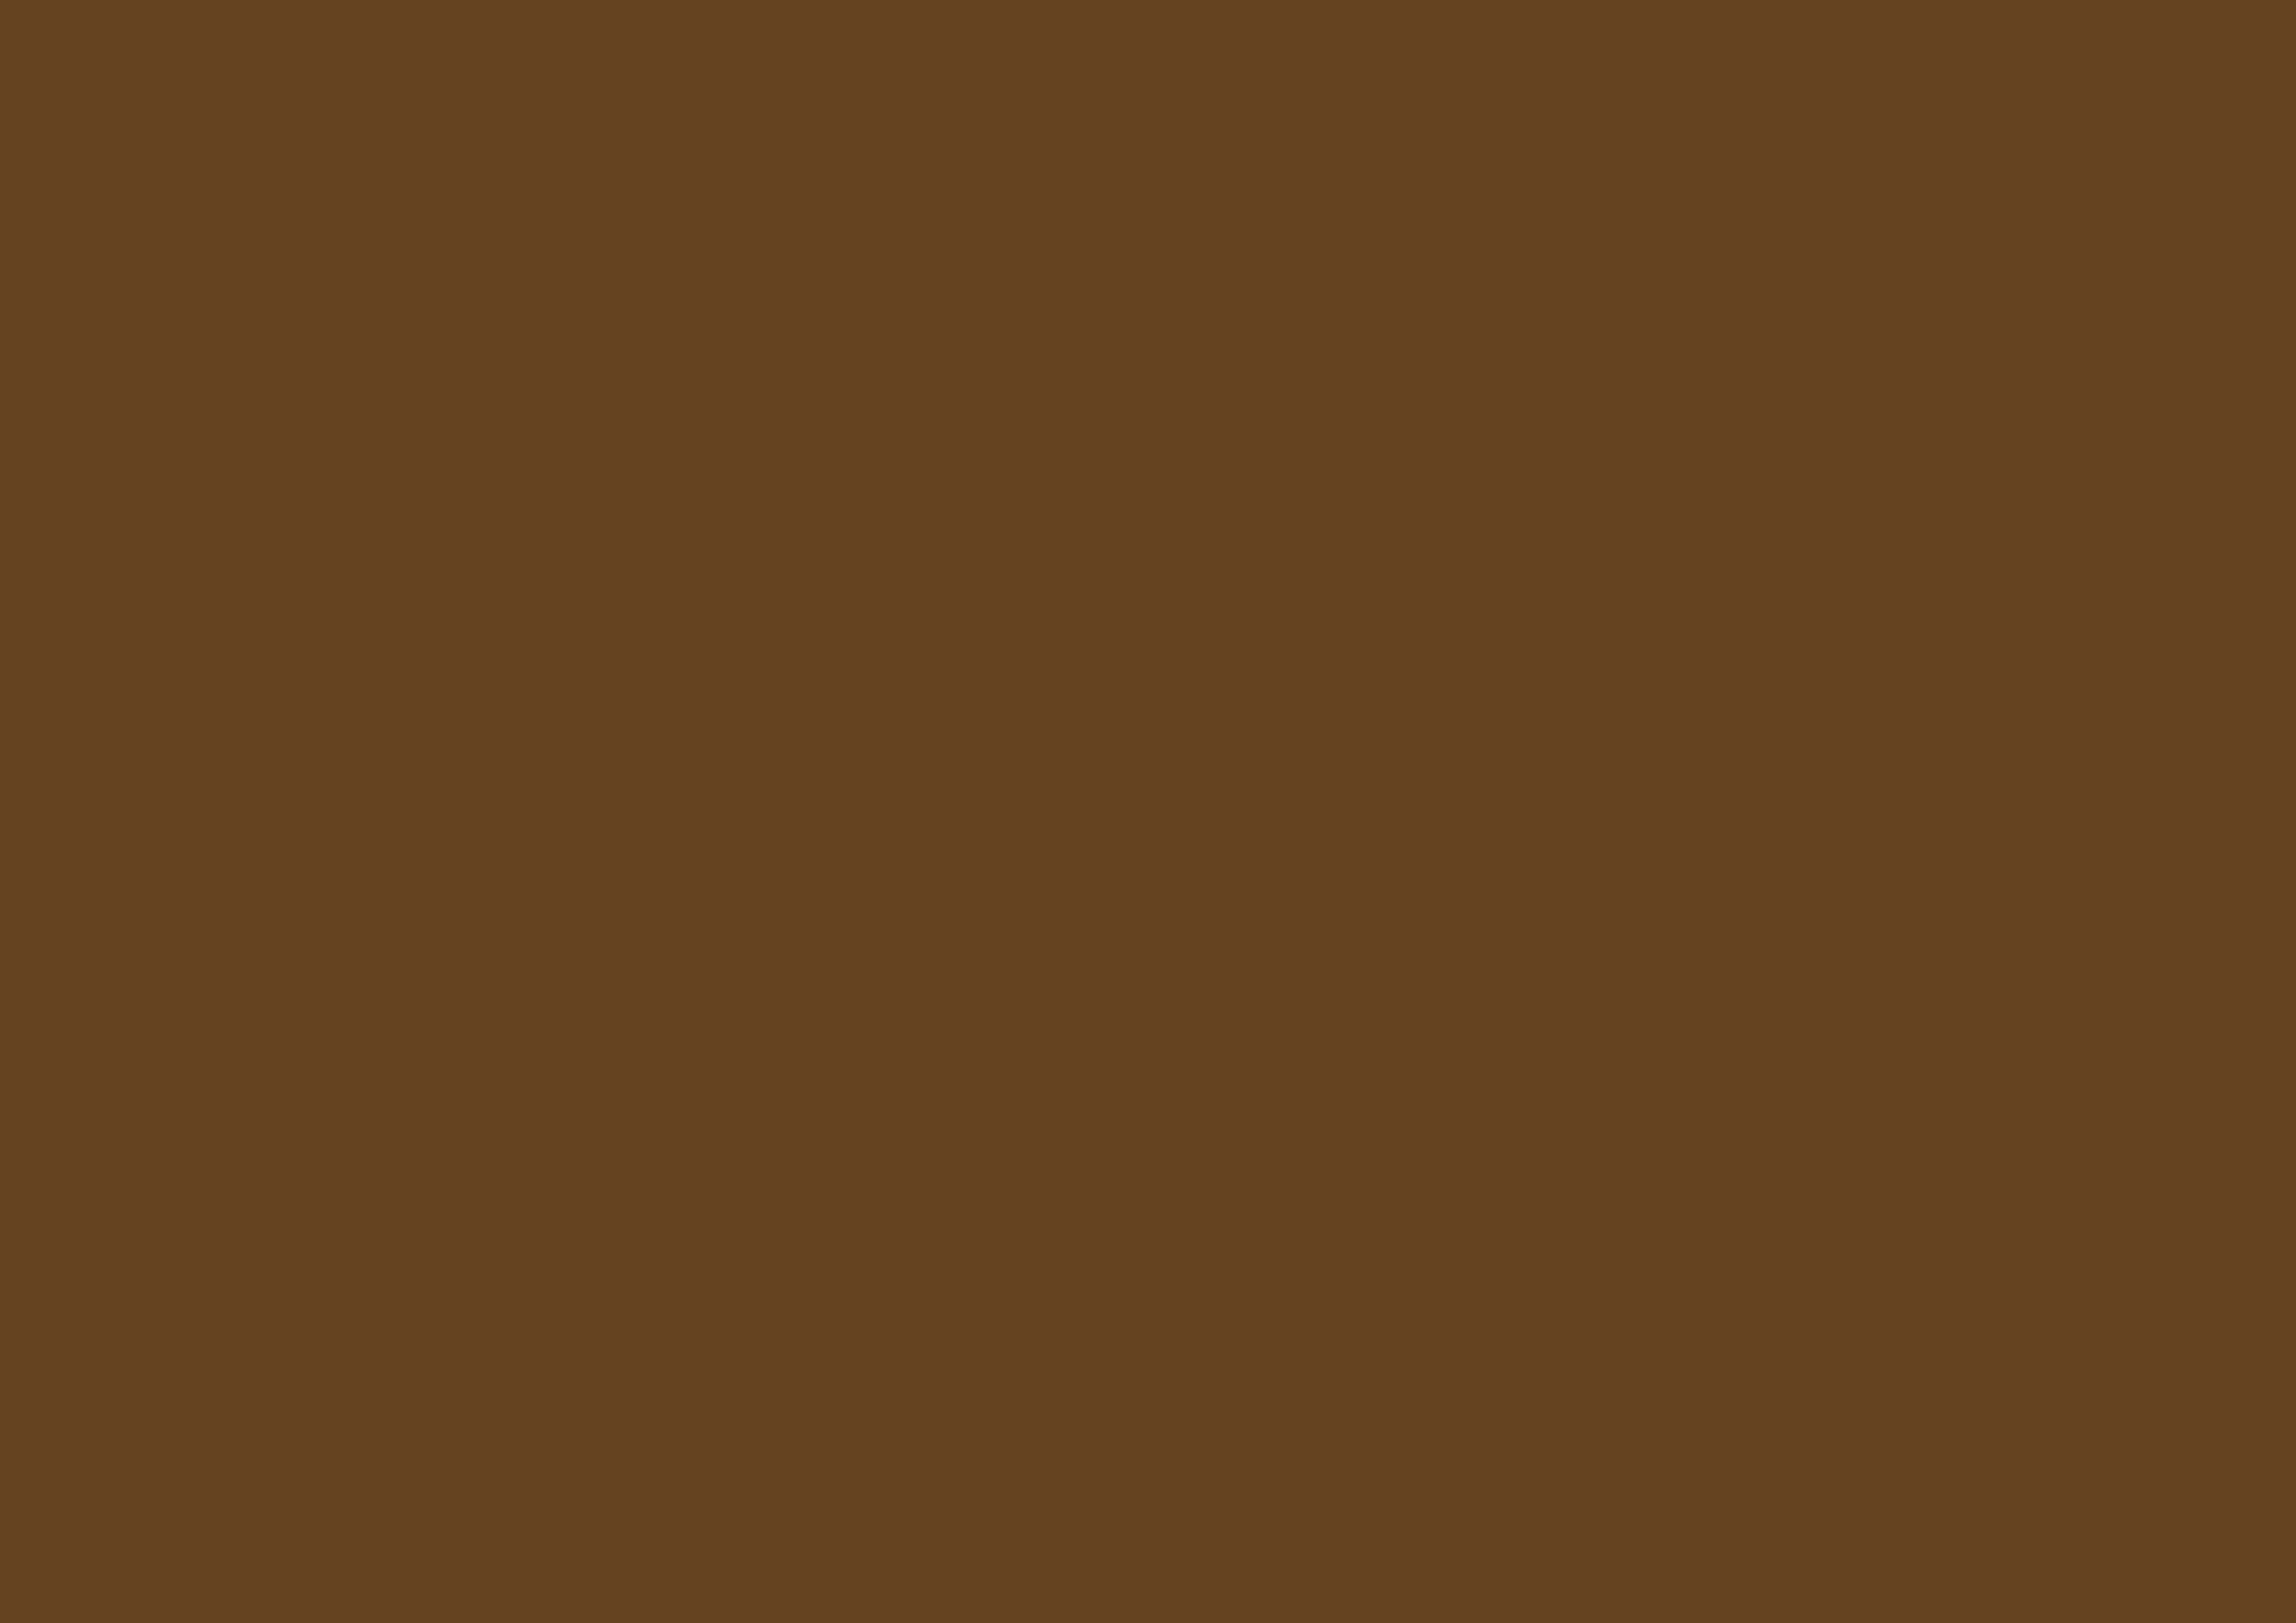 3508x2480 Otter Brown Solid Color Background